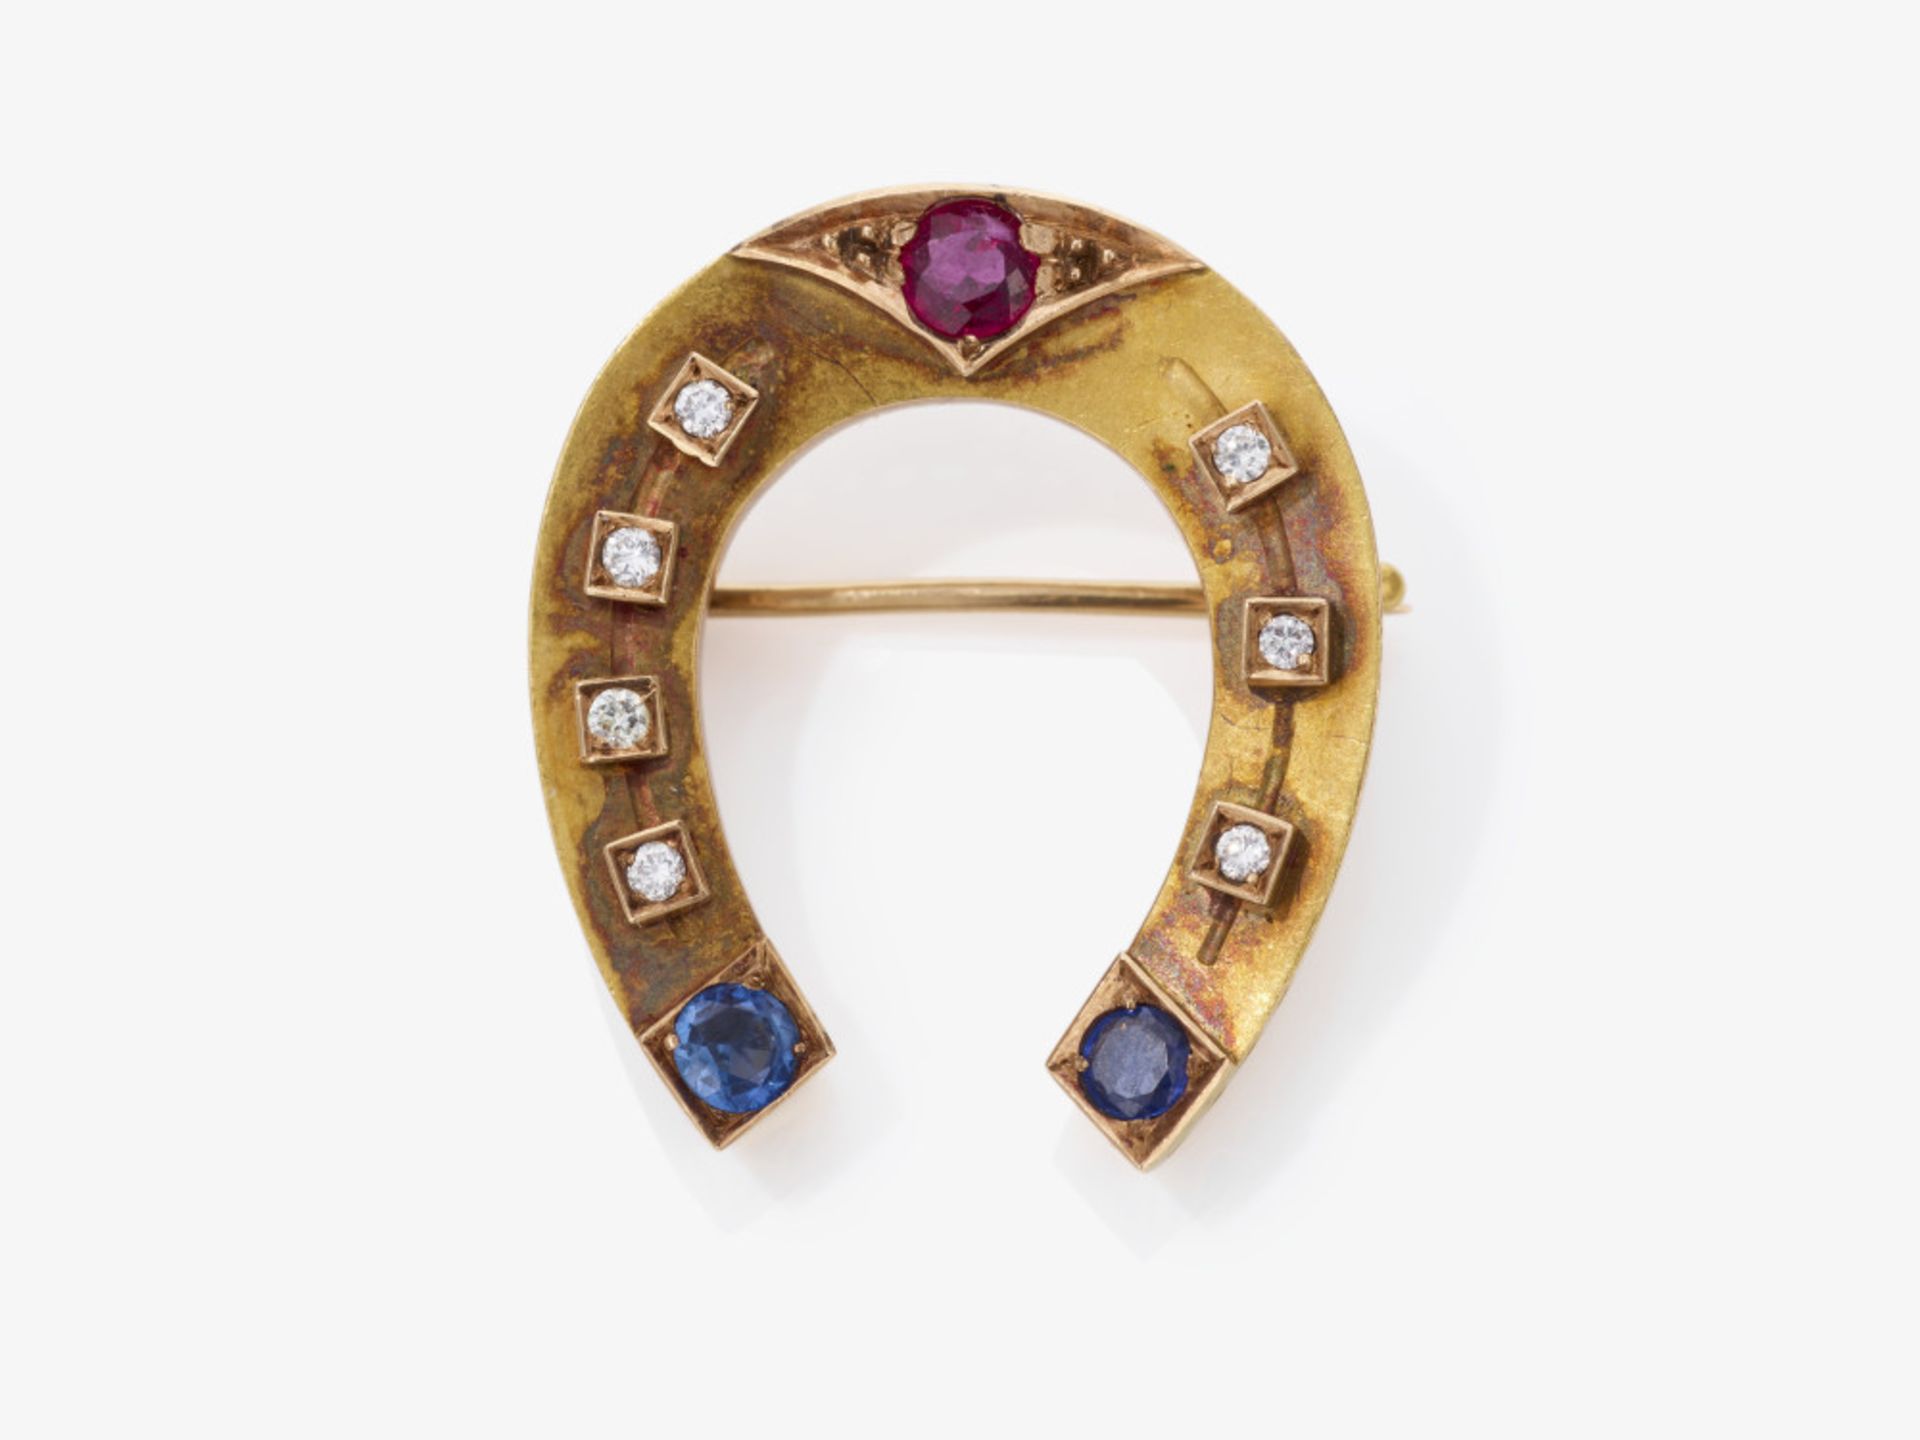 A horseshoe brooch with brilliant-cut diamonds, a ruby and sapphires - Russia, circa 1900